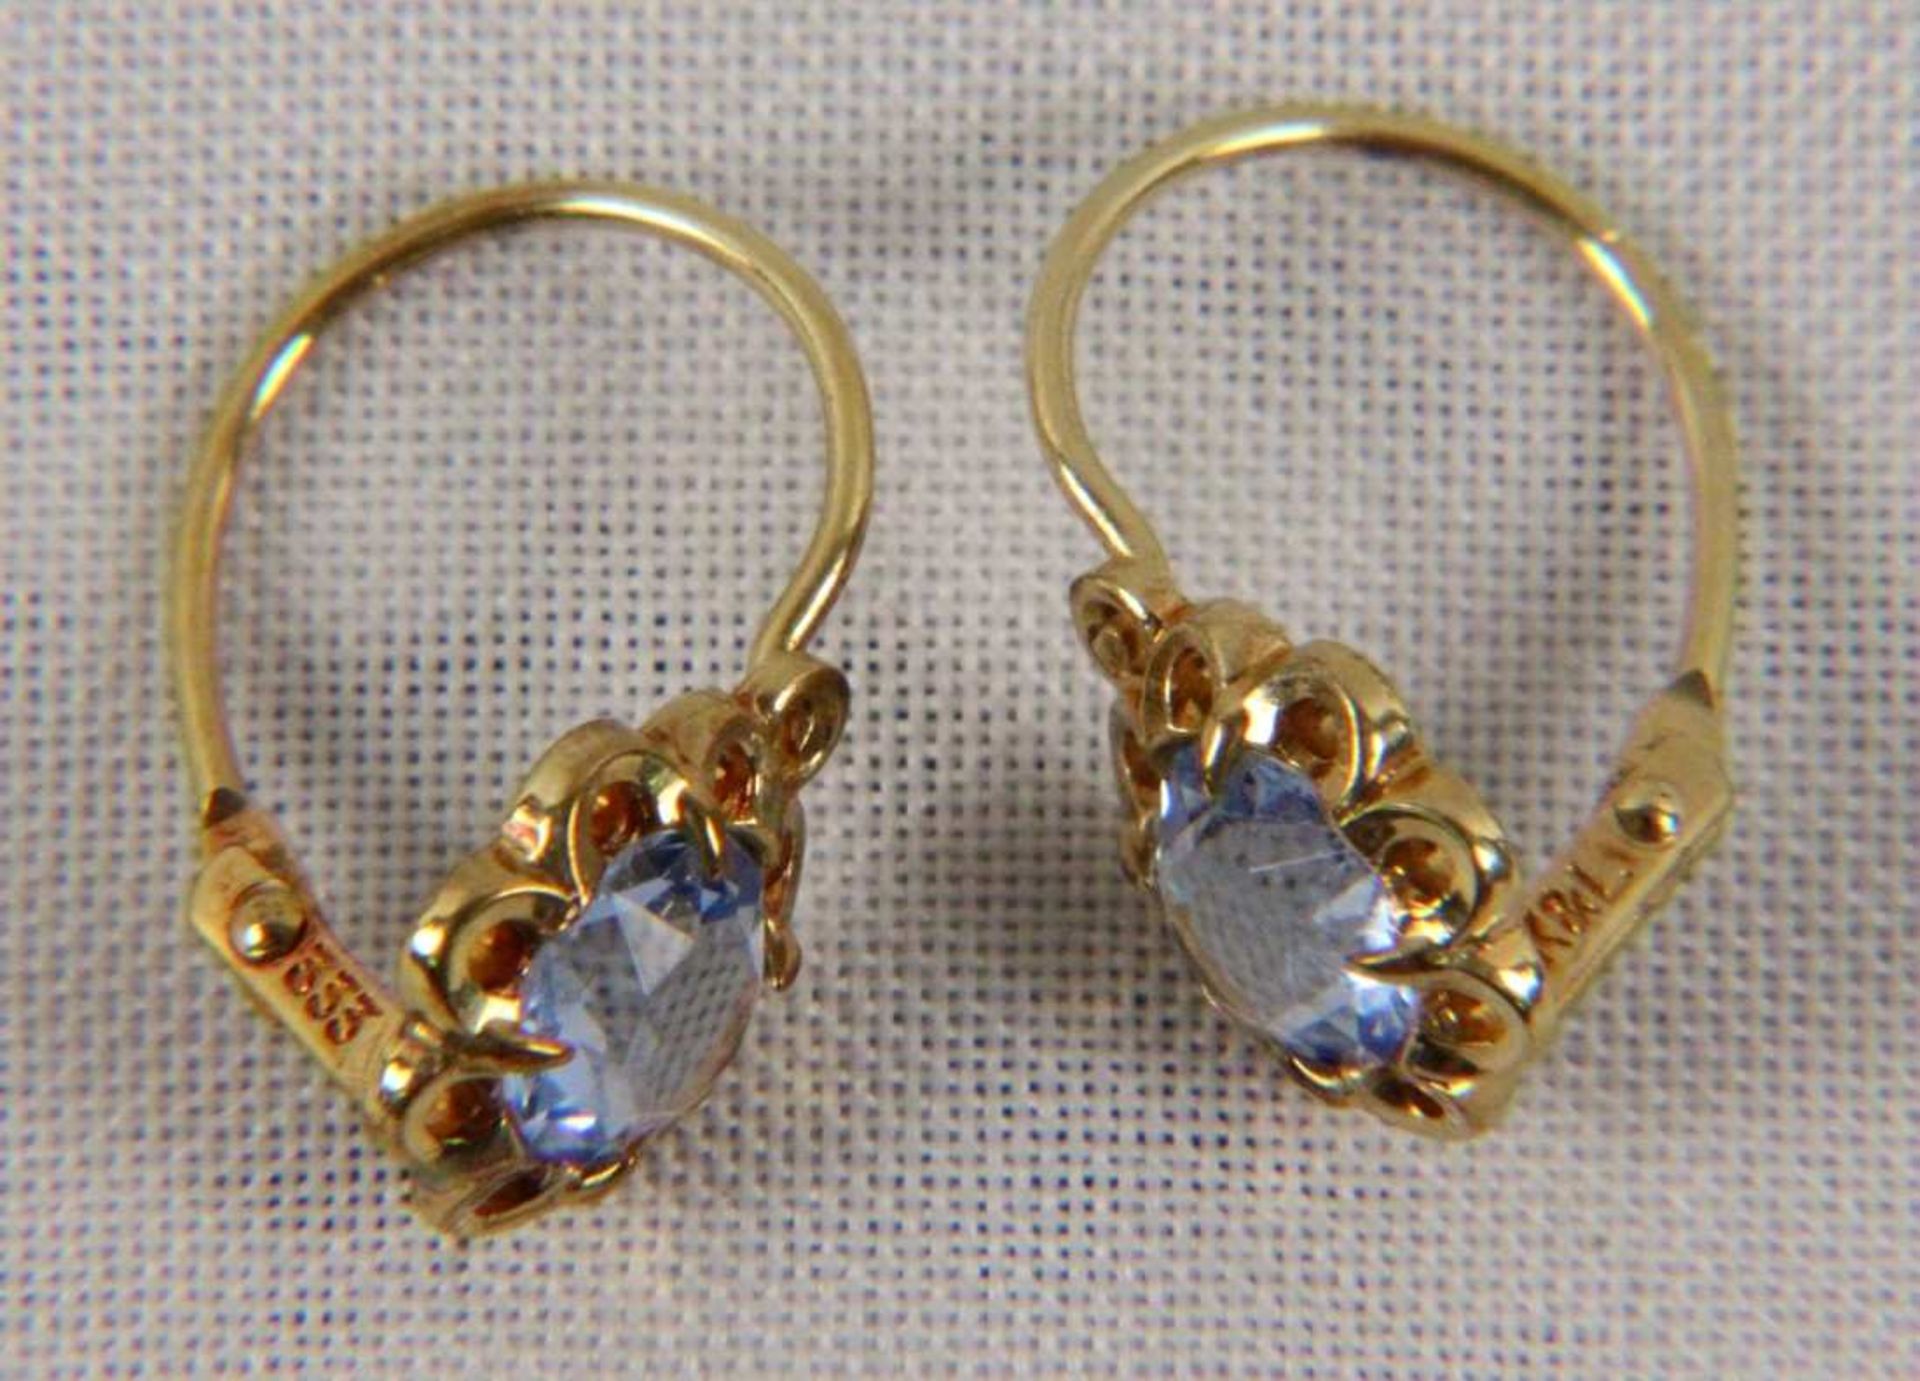 PAAR OHRRRINGE 333/000 Gelbgold mit Blautopasen. A PAIR OF EARRINGS 333/000 yellow gold with blue